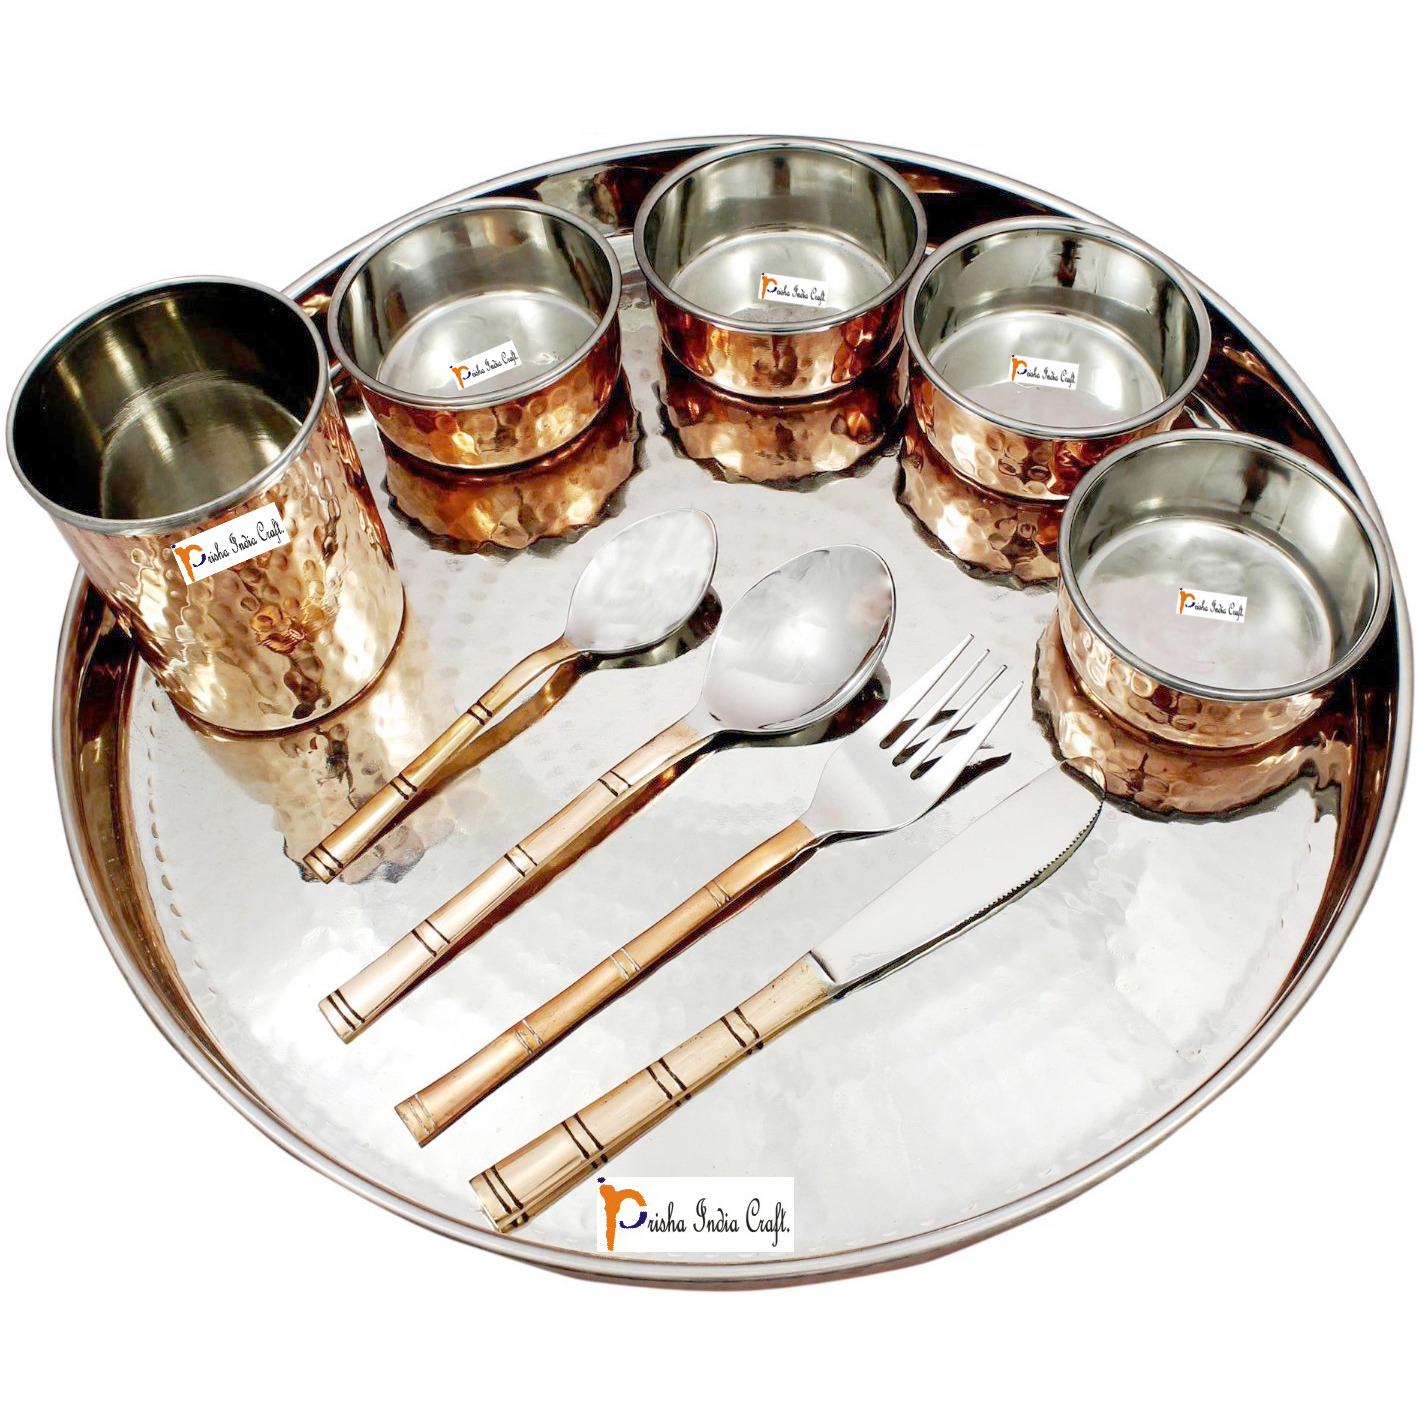 Prisha India Craft B. Set of 6 Dinnerware Traditional Stainless Steel Copper Dinner Set of Thali Plate, Bowls, Glass and Spoons, Dia 13  With 1 Pure Copper Hammered Pitcher Jug - Christmas Gift